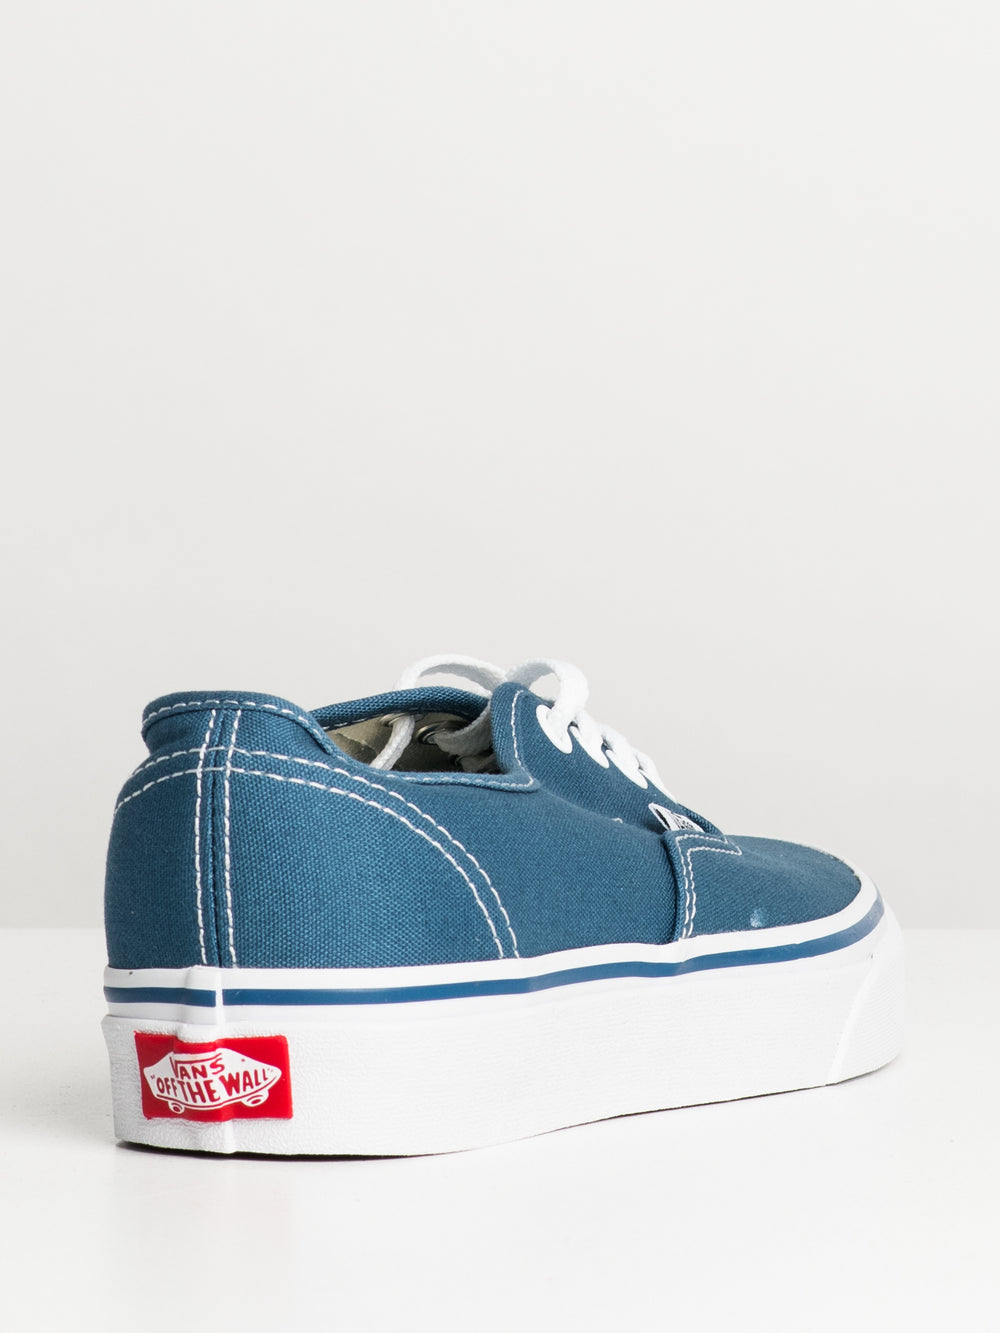 WOMENS VANS AUTHENTIC SNEAKER - CLEARANCE